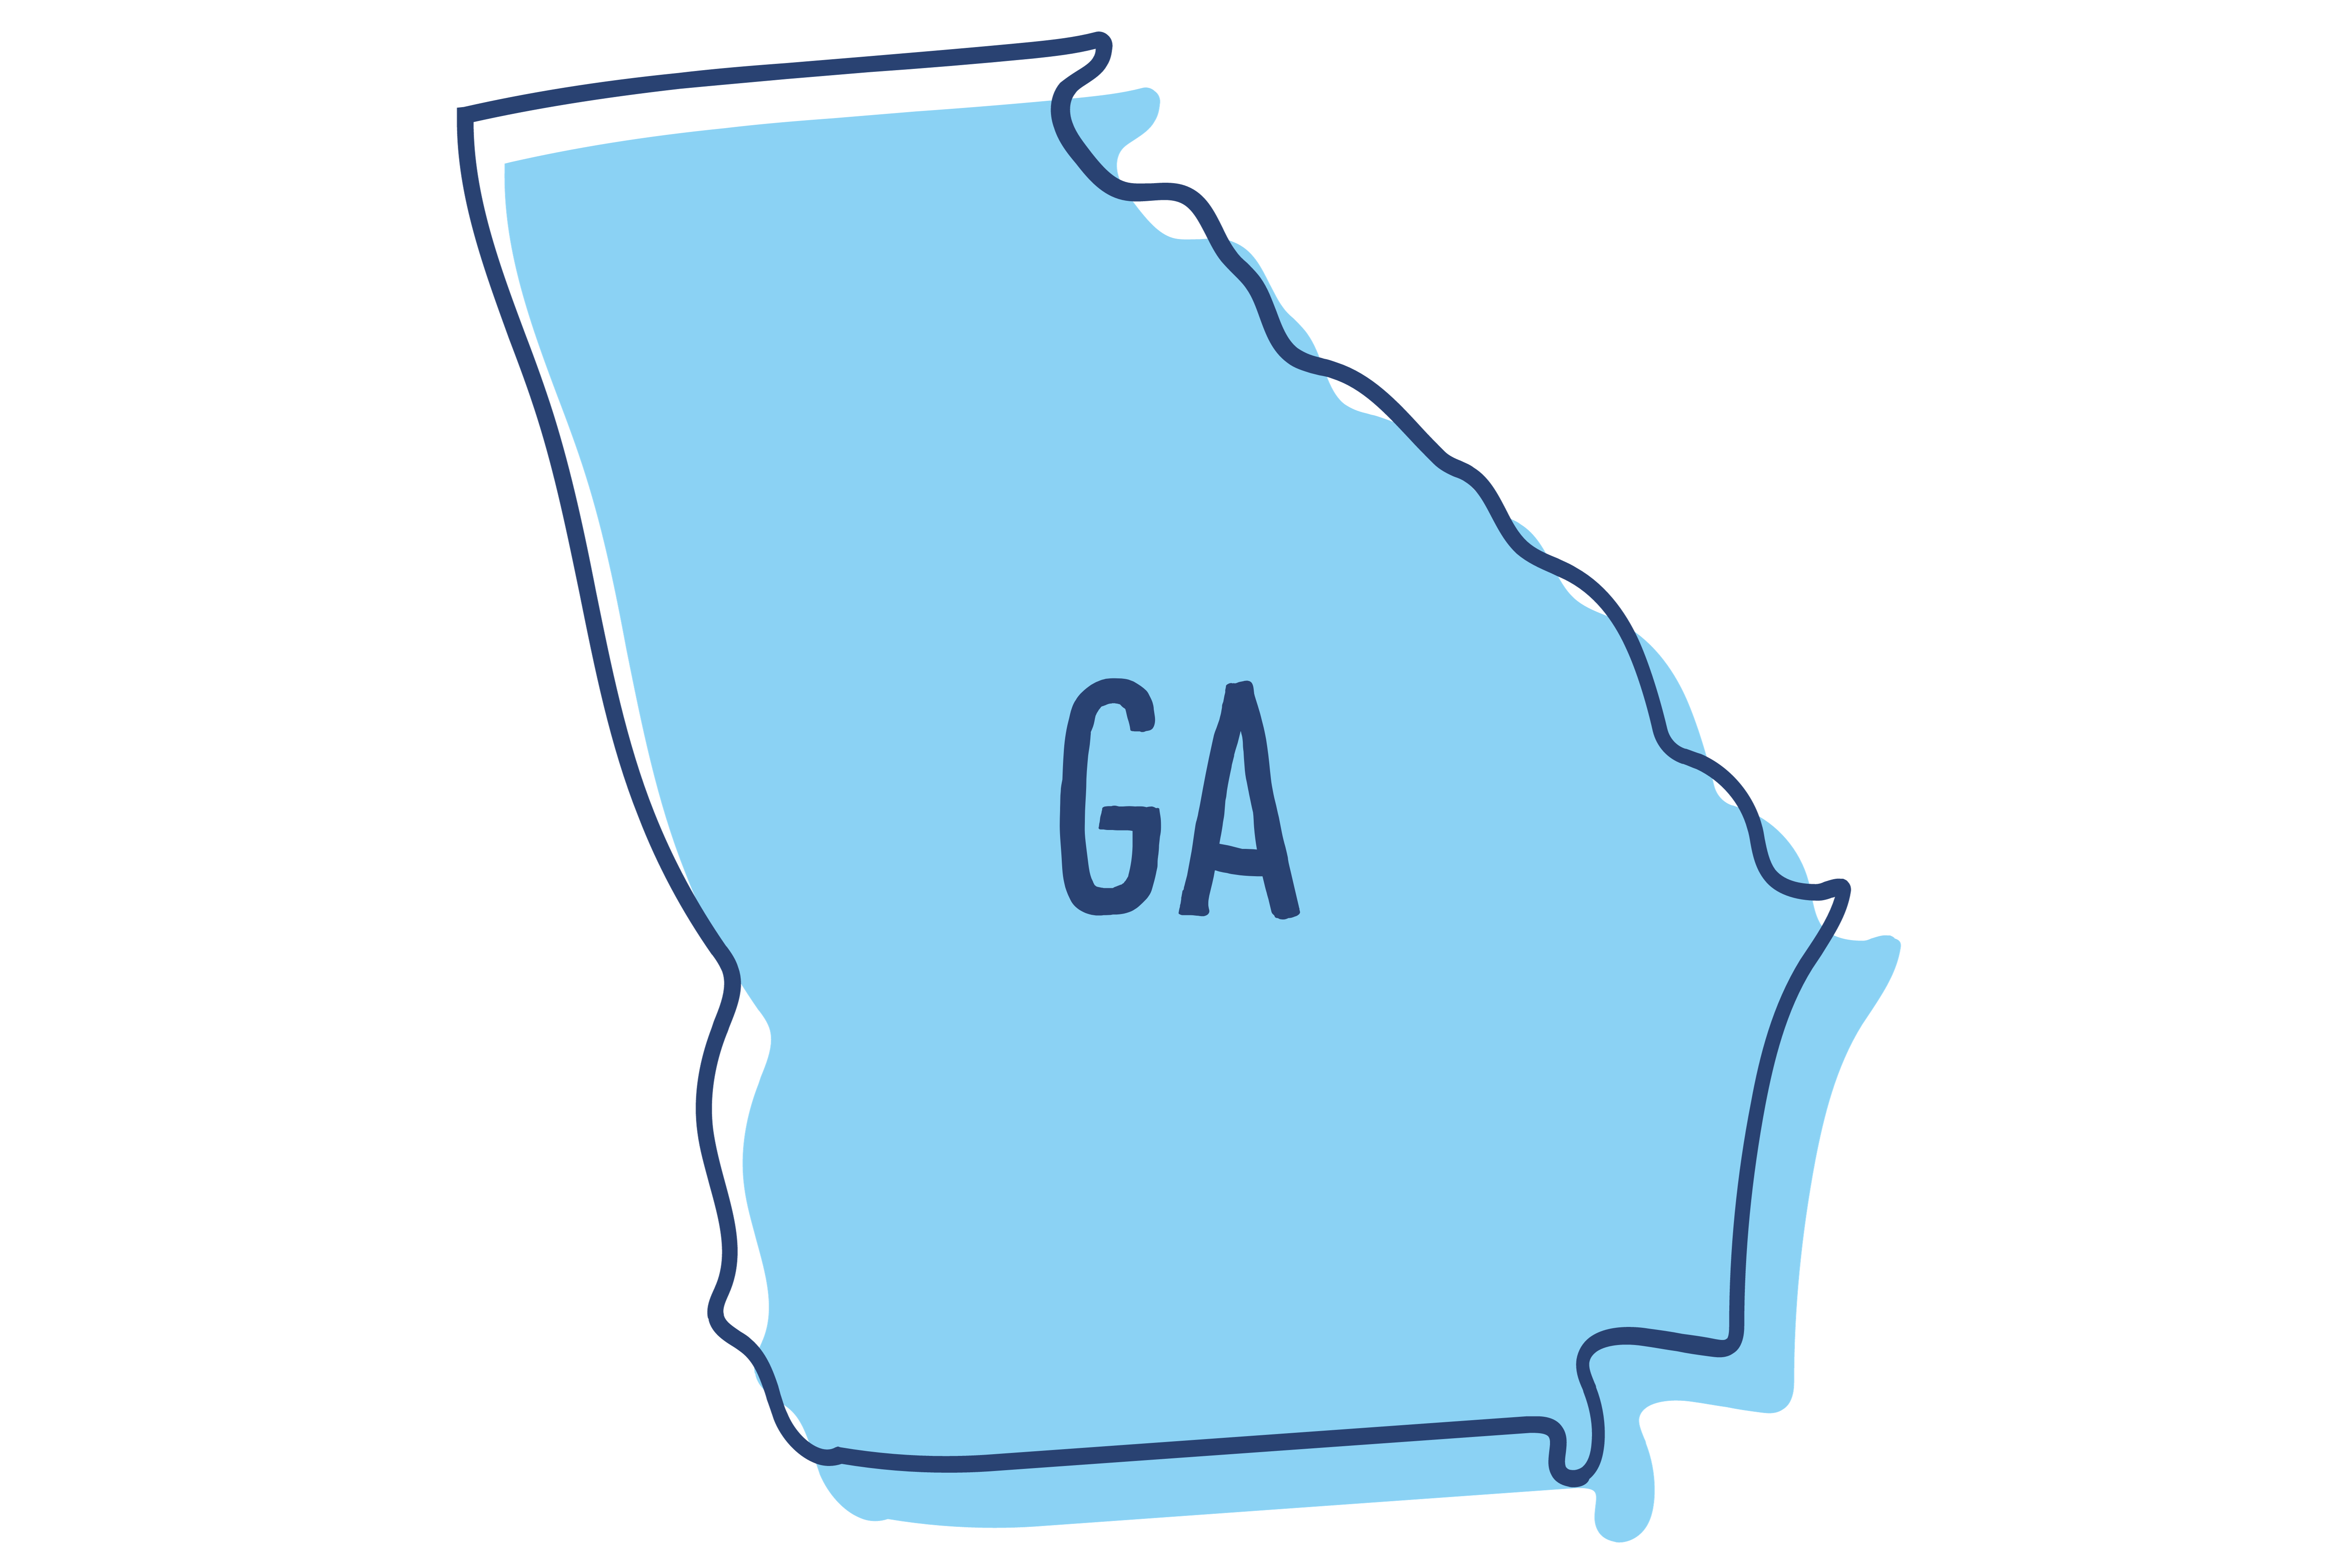 The state of Georgia is depicted in light blue with a dark blue border.